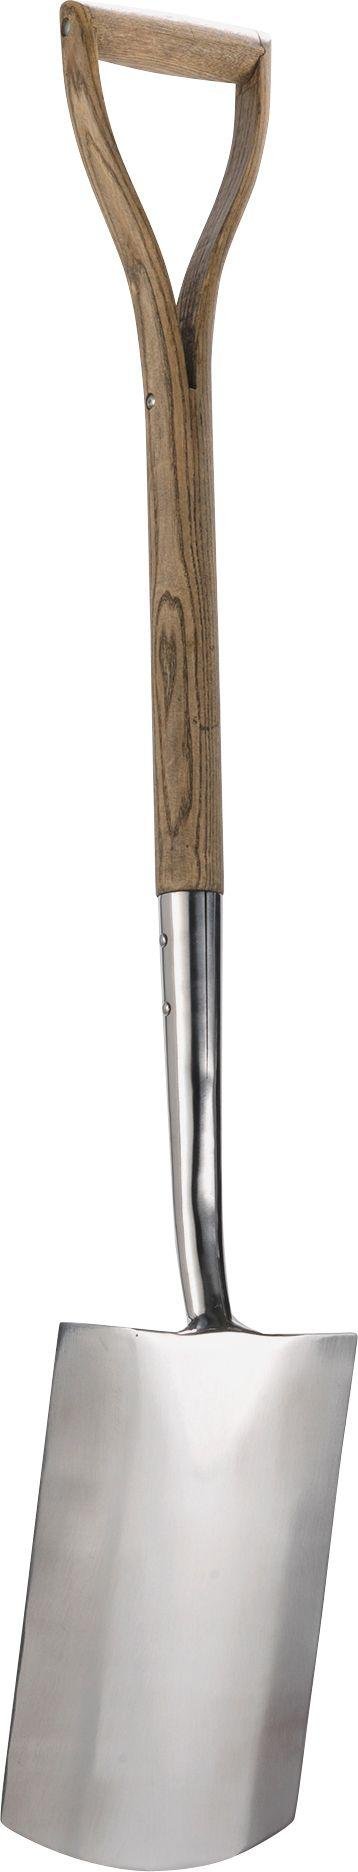 Spear & Jackson Traditional Digging Spade Review